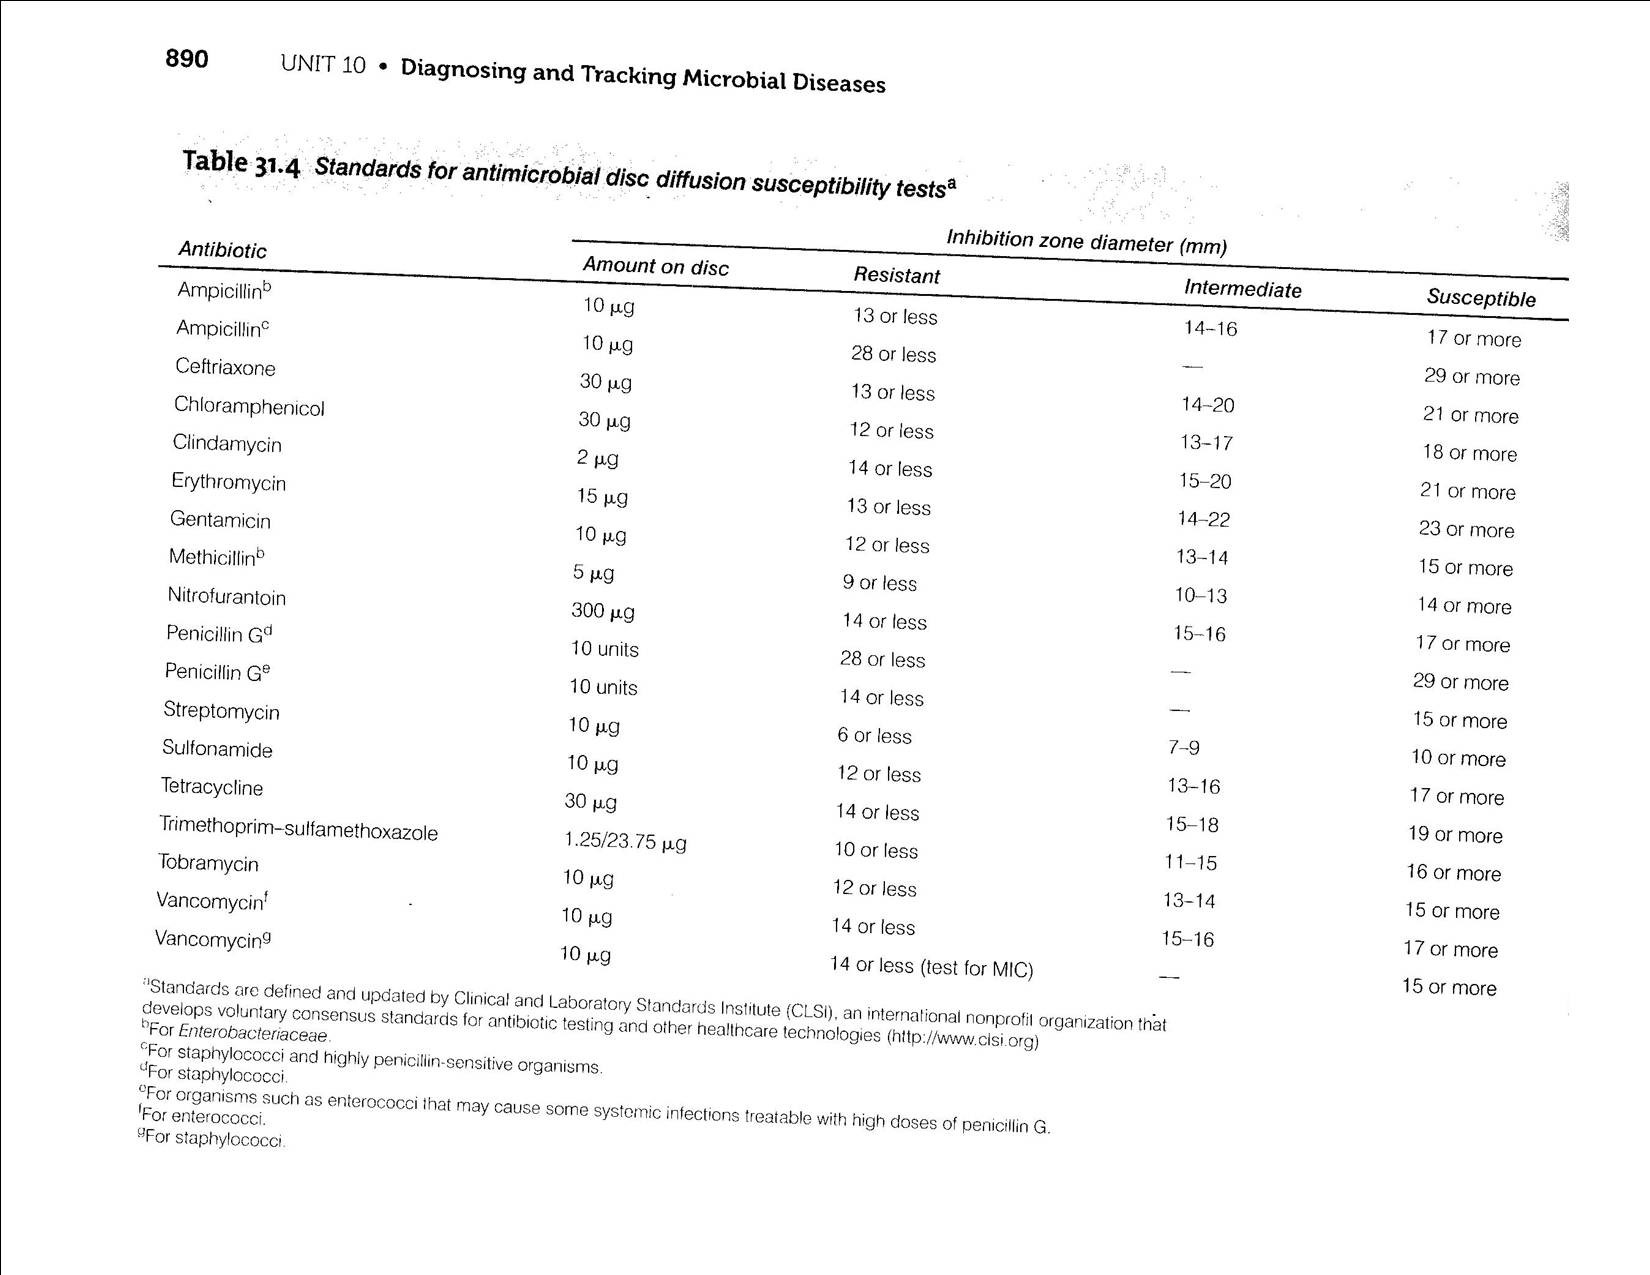 Standard table for antimicrobial disc diffusion susceptibility test